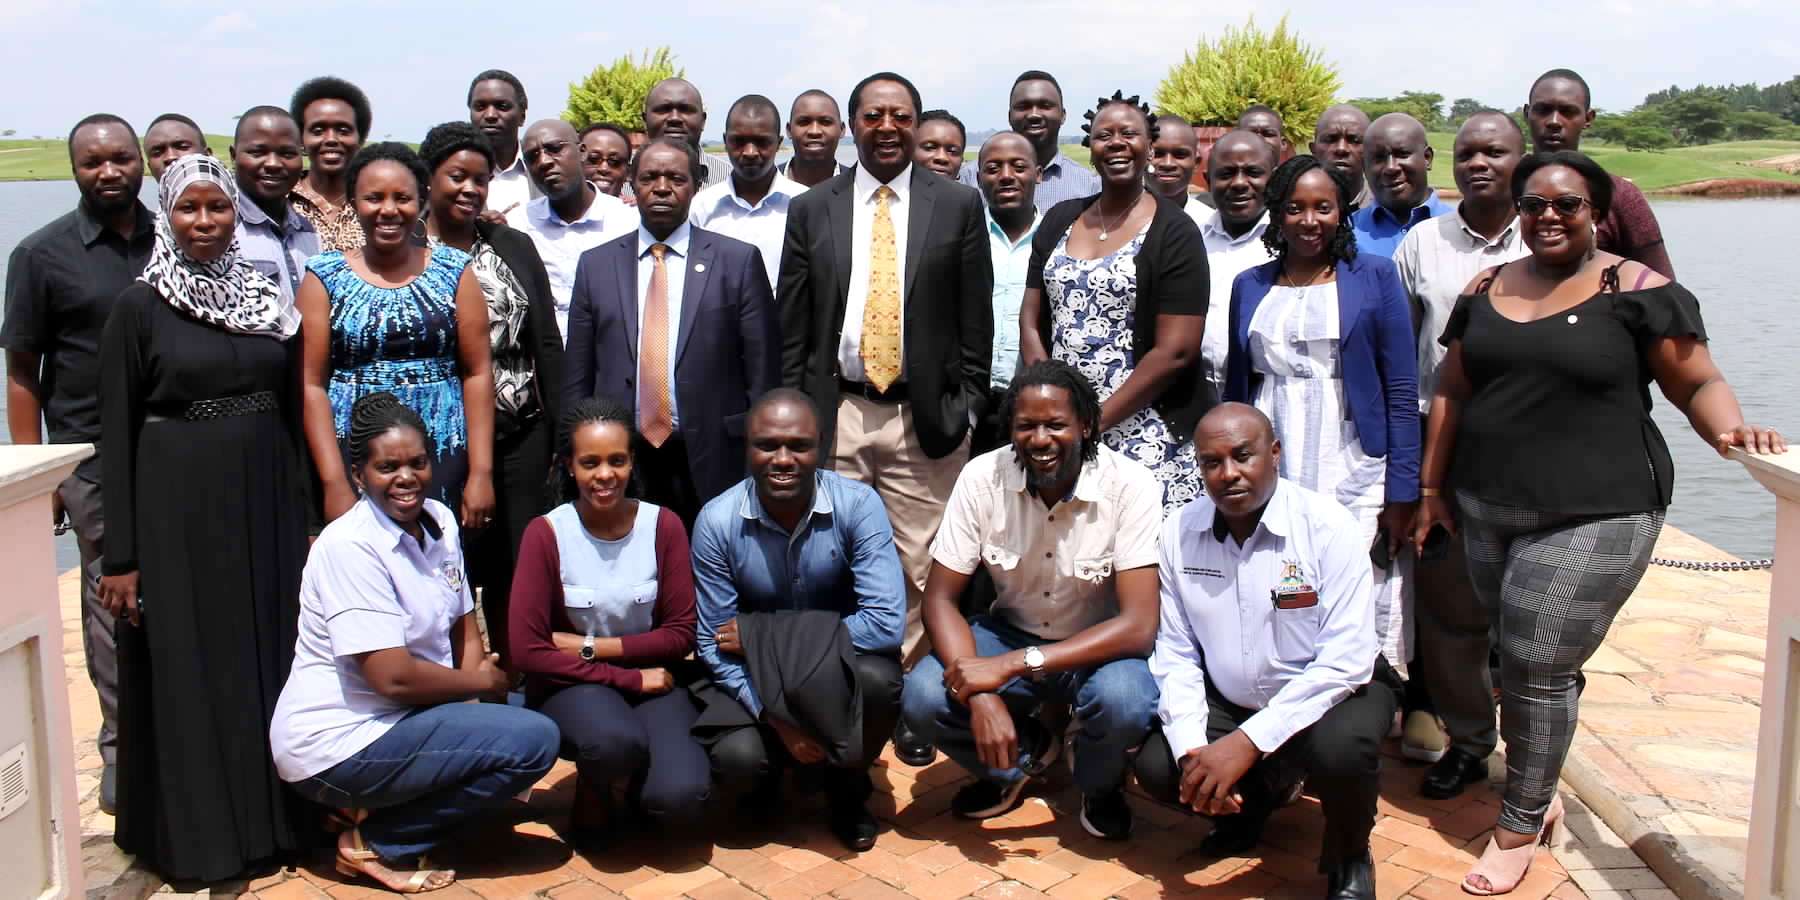 The PI-Prof. William Bazeyo (Centre Brown Tie) and Prof. David Serwadda (Centre Gold Tie) with the MakSPH-METS Program Team in 2019. Photo credit: MakSPH-METS